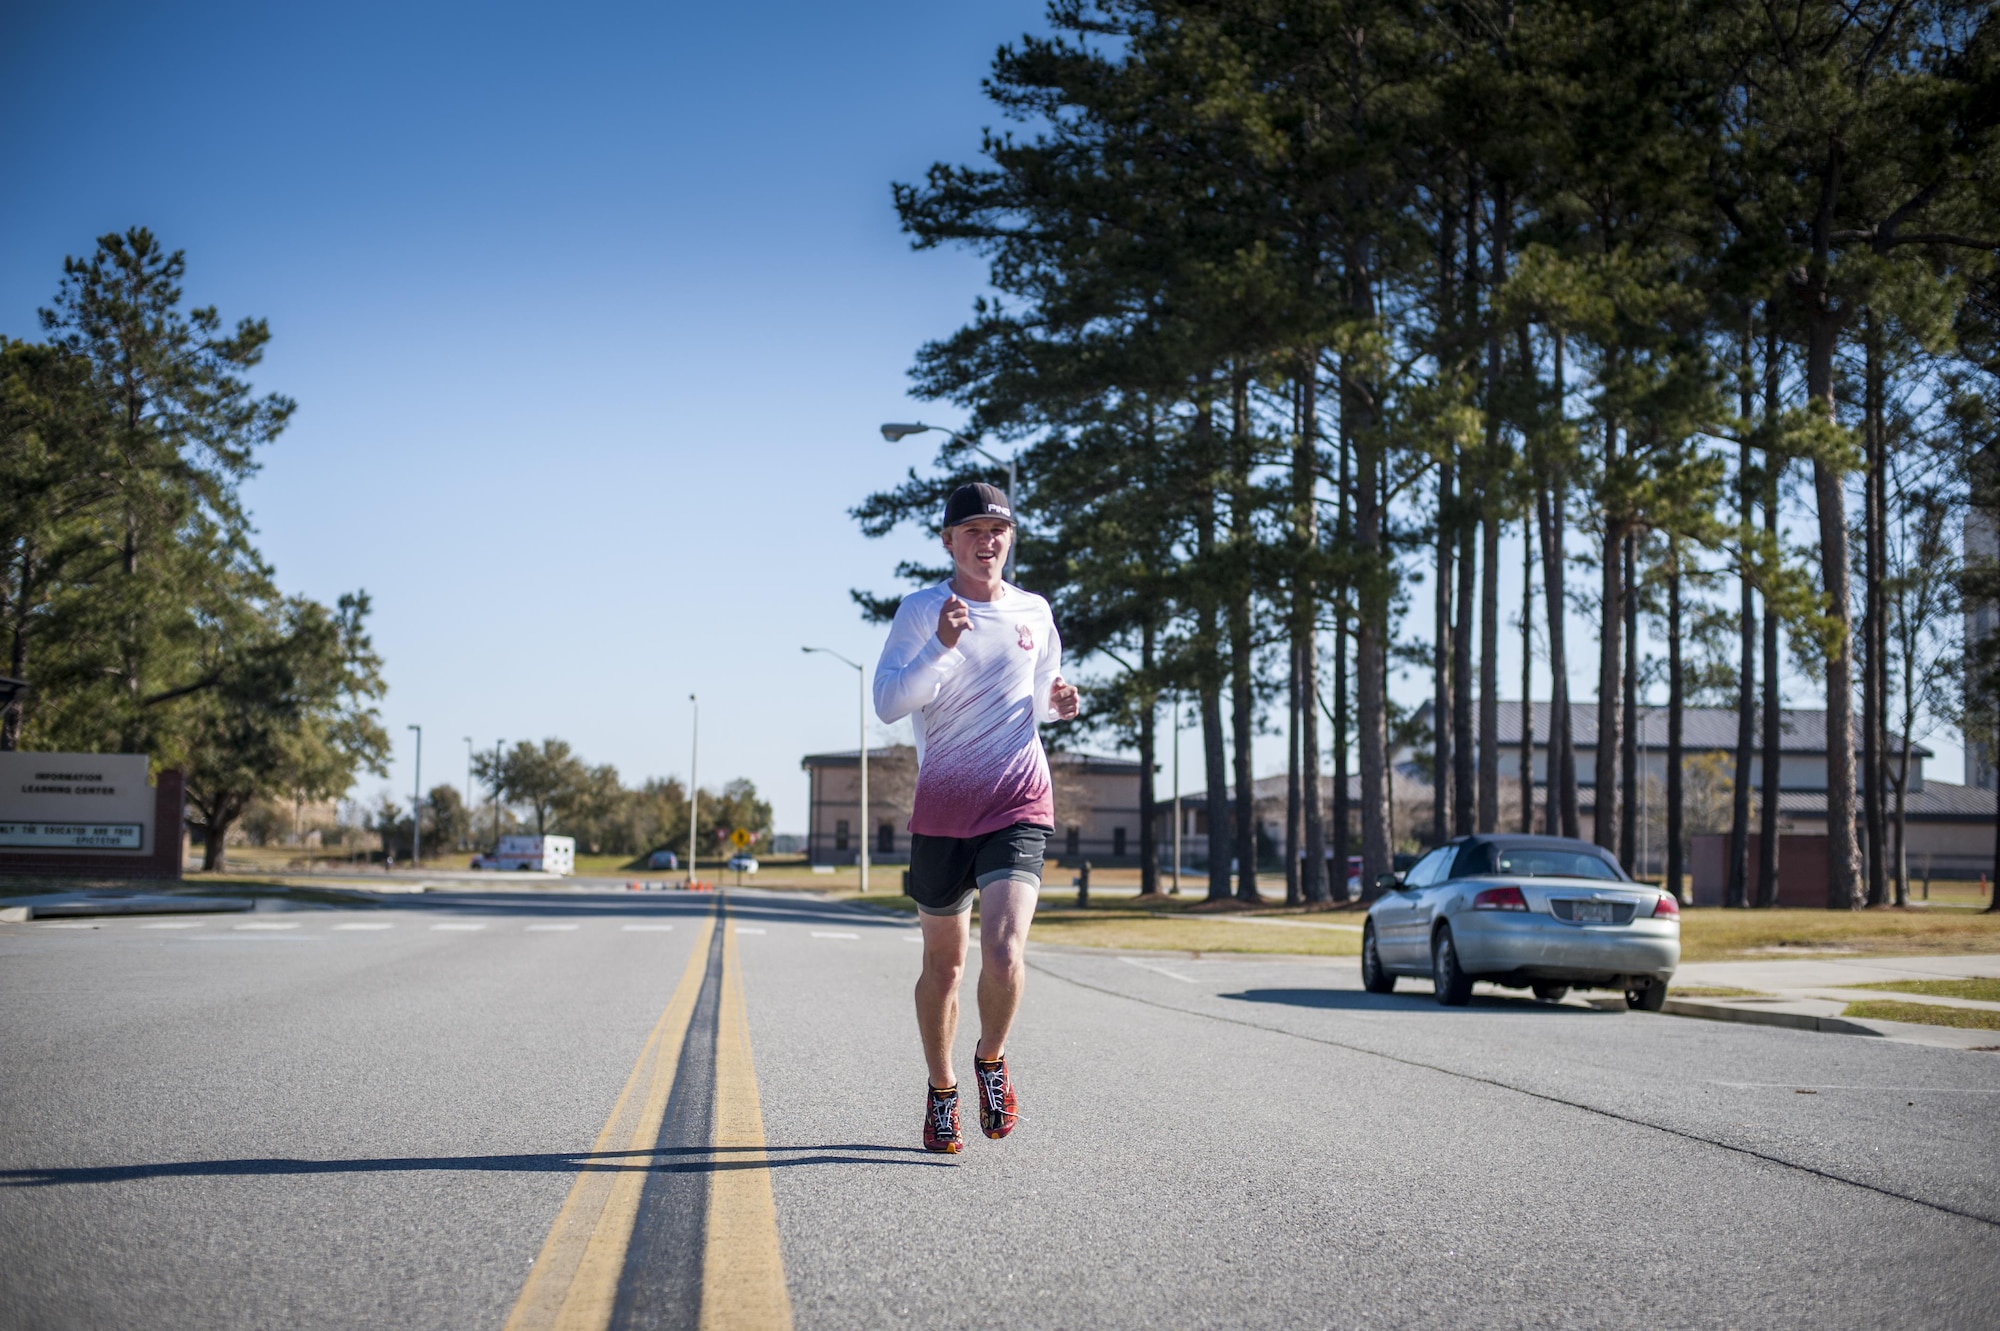 Carson Locke, son of U.S. Air Force Col. Joseph Locke, 93d Air Ground Operations Wing commander, runs through the finish line during the Family & Furry Friends 5k, March 5, 2016, at Moody Air Force Base, Ga. Carson was the first to finish the 5k in just over 23 minutes. (U.S. Air Force photo by Airman 1st Class Lauren M. Johnson)